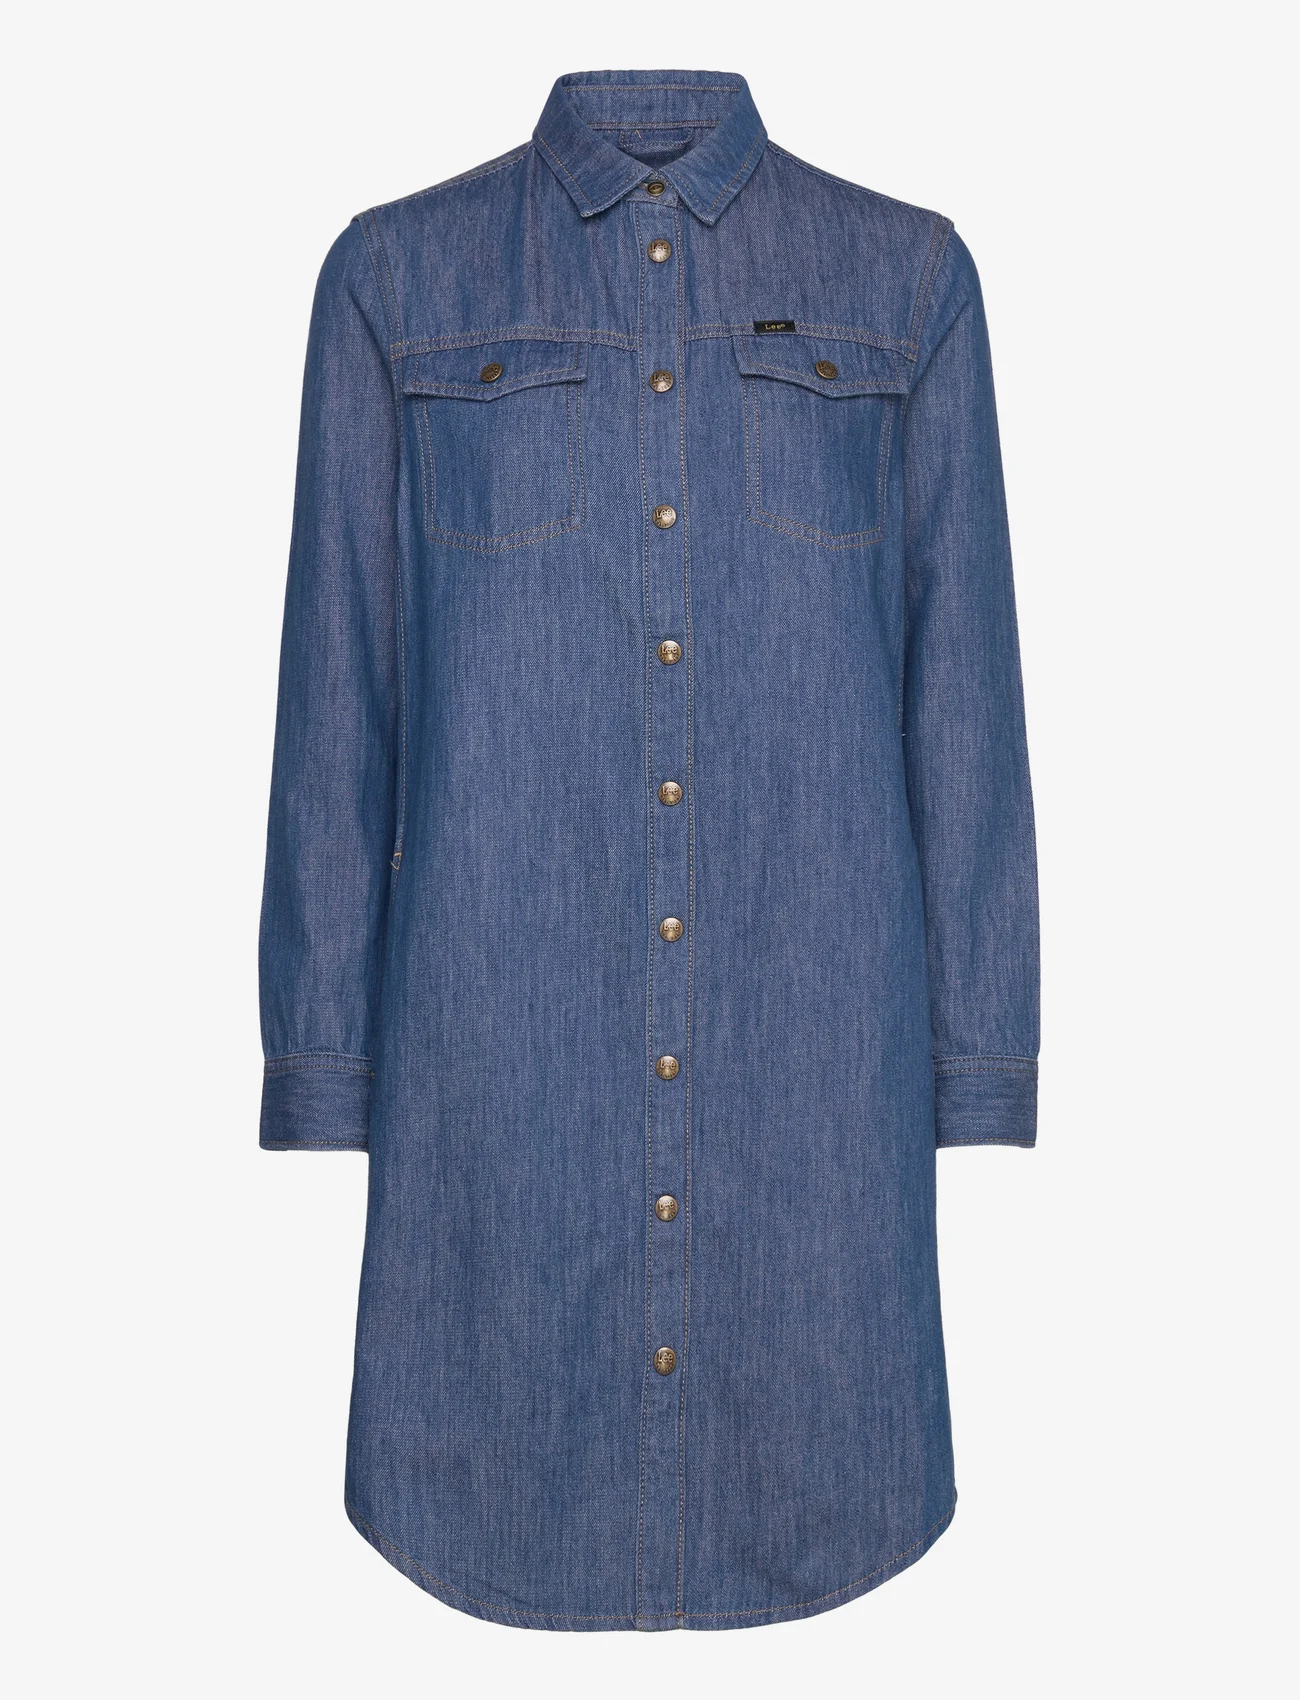 Lee Jeans - SHIRT DRESS - cowboykjoler - sparkle within - 0